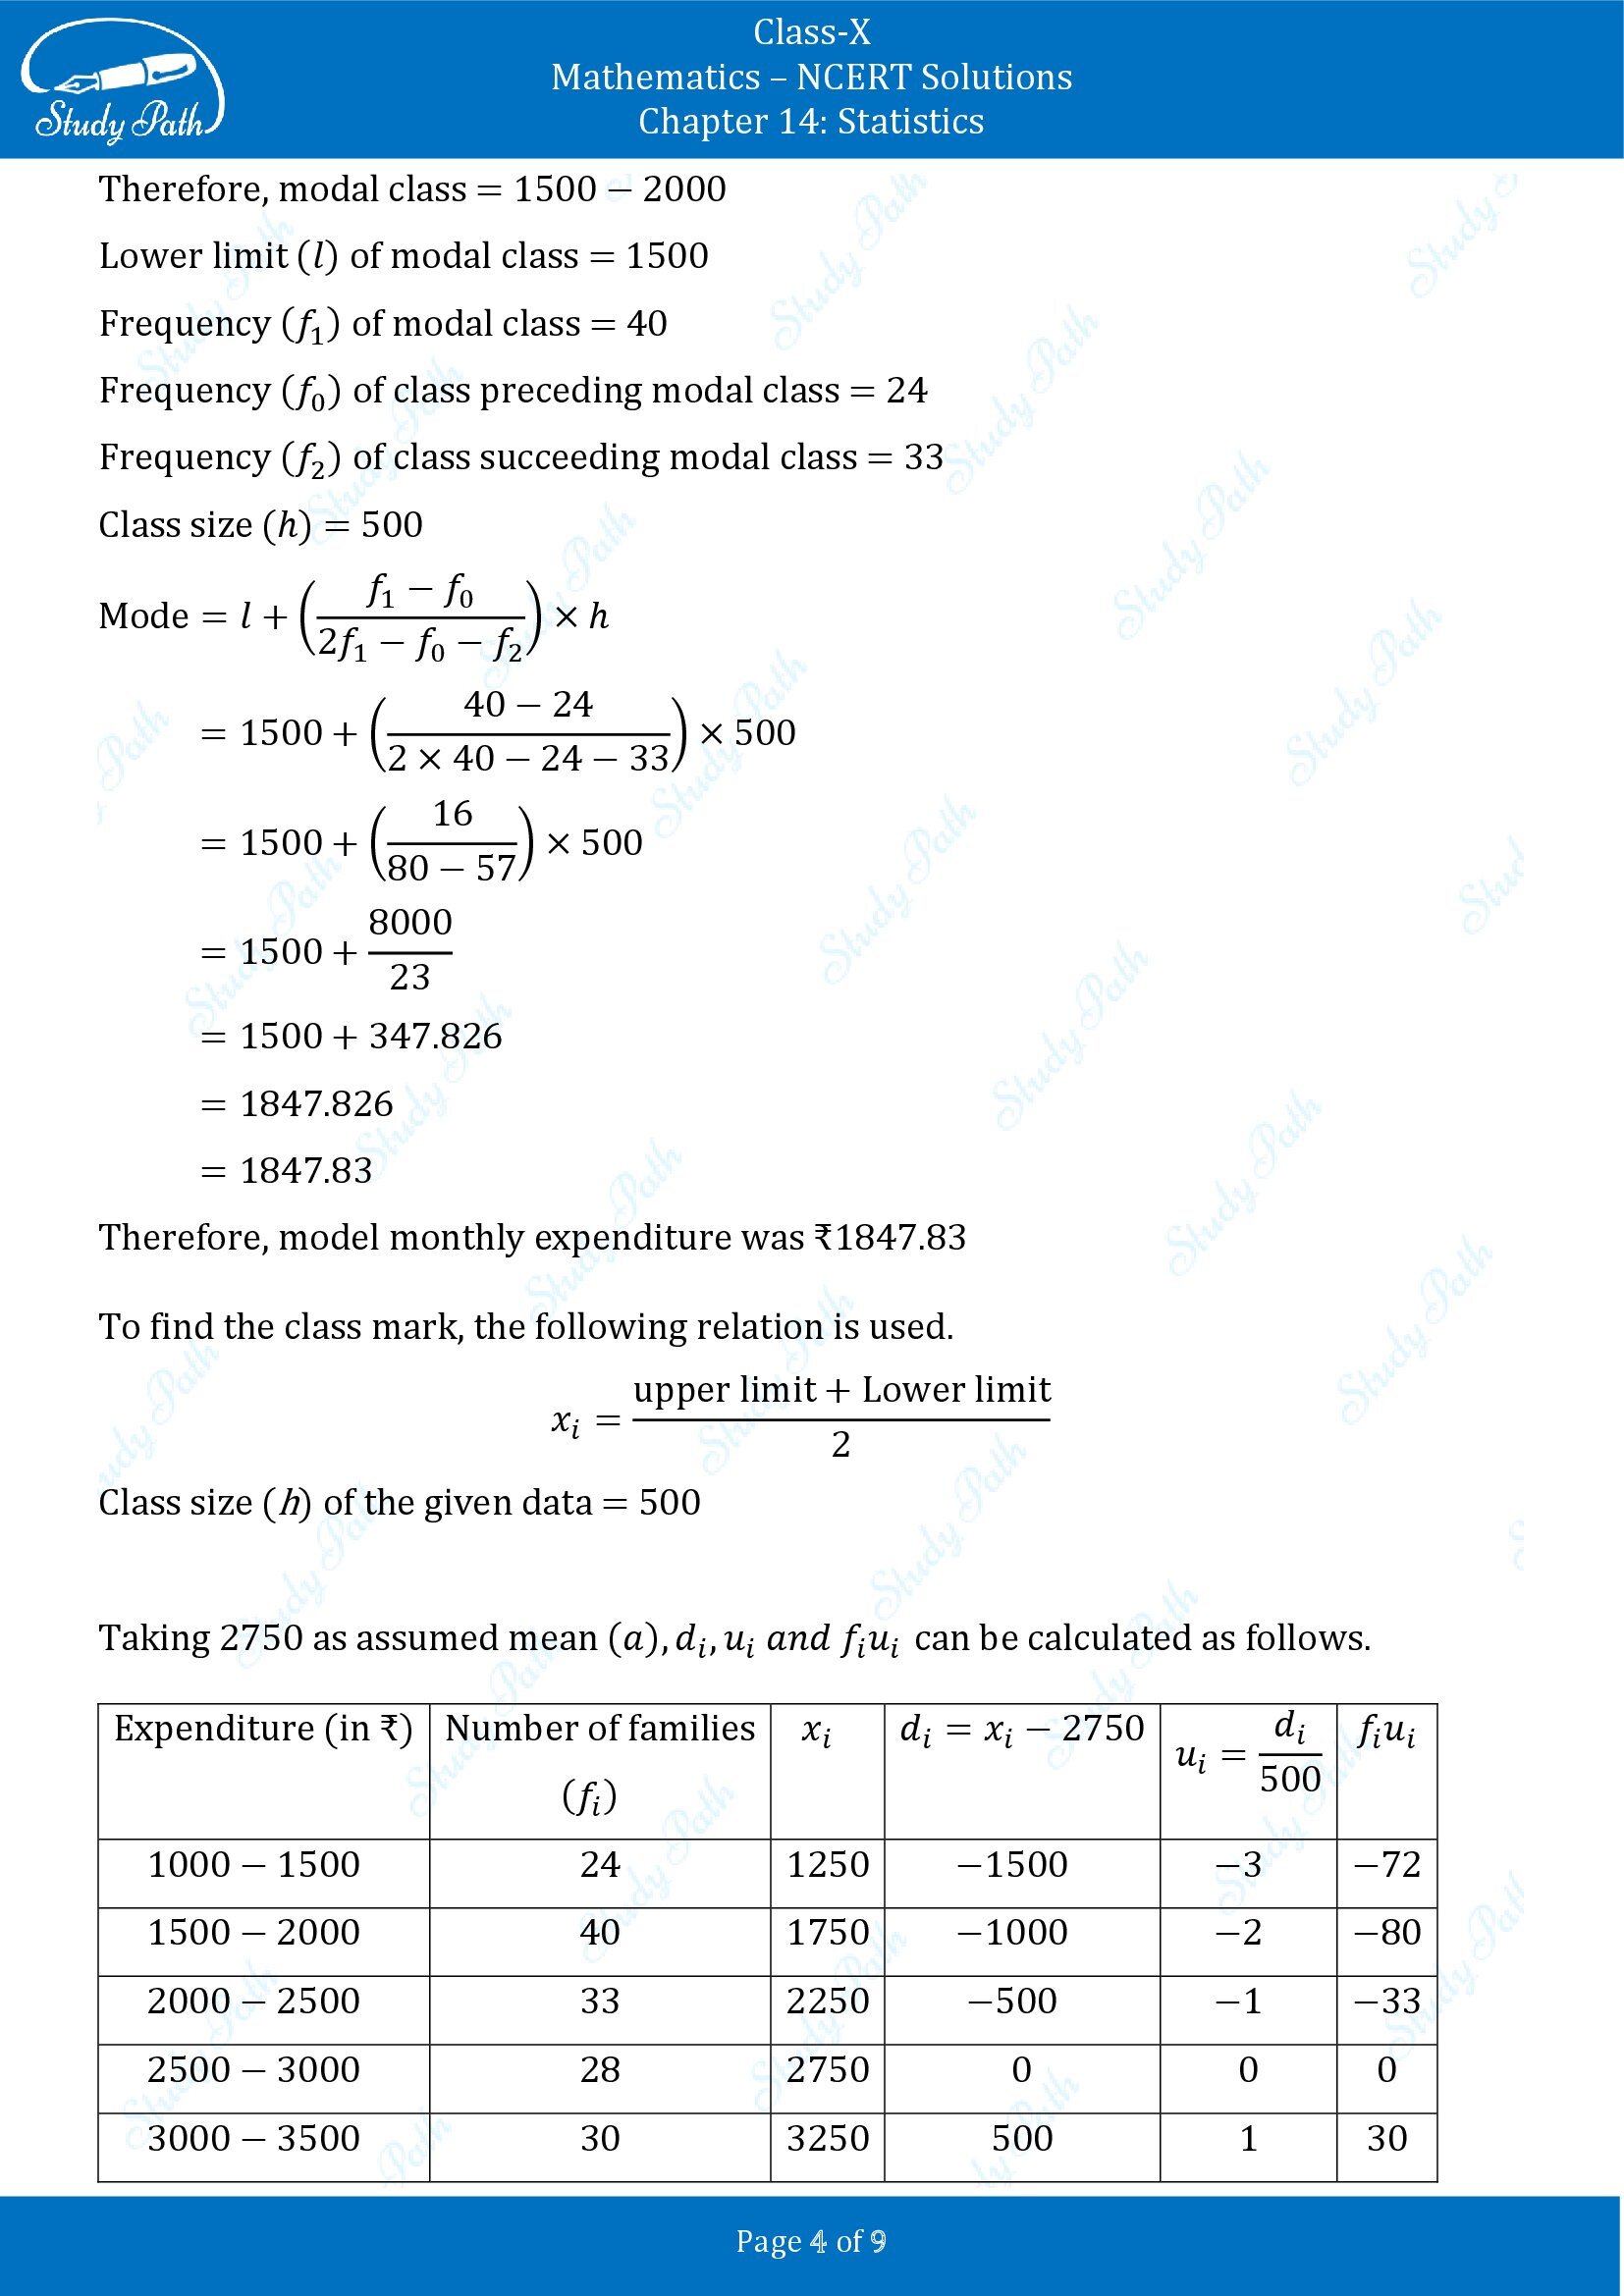 NCERT Solutions for Class 10 Maths Chapter 14 Statistics Exercise 14.2 00004